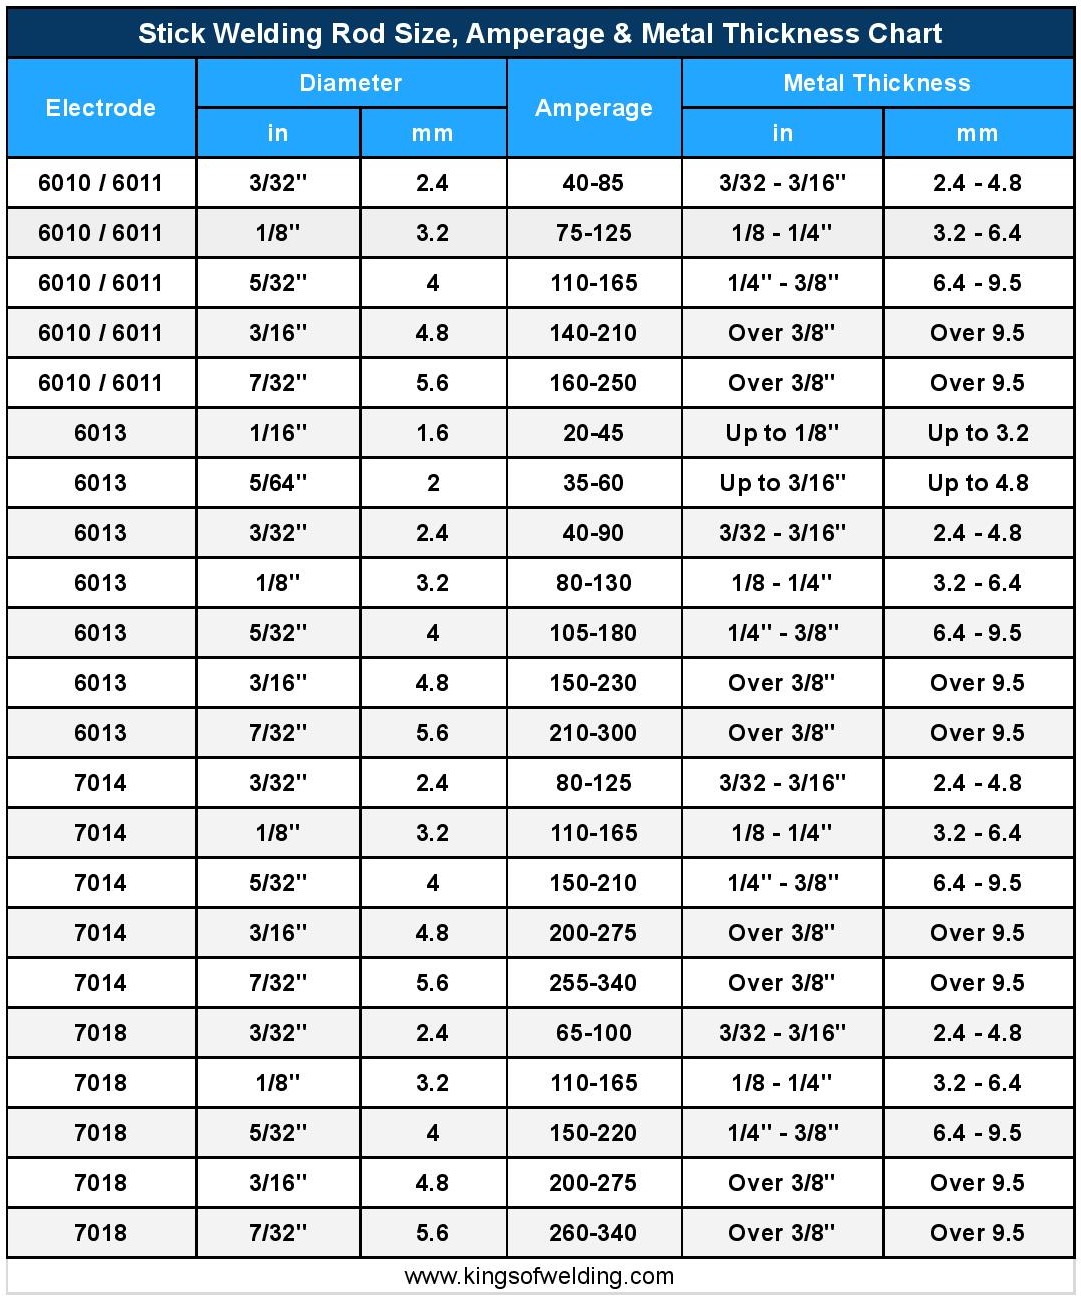 welding-rod-sizes-amperage-metal-thickness-chart-kings-of-welding